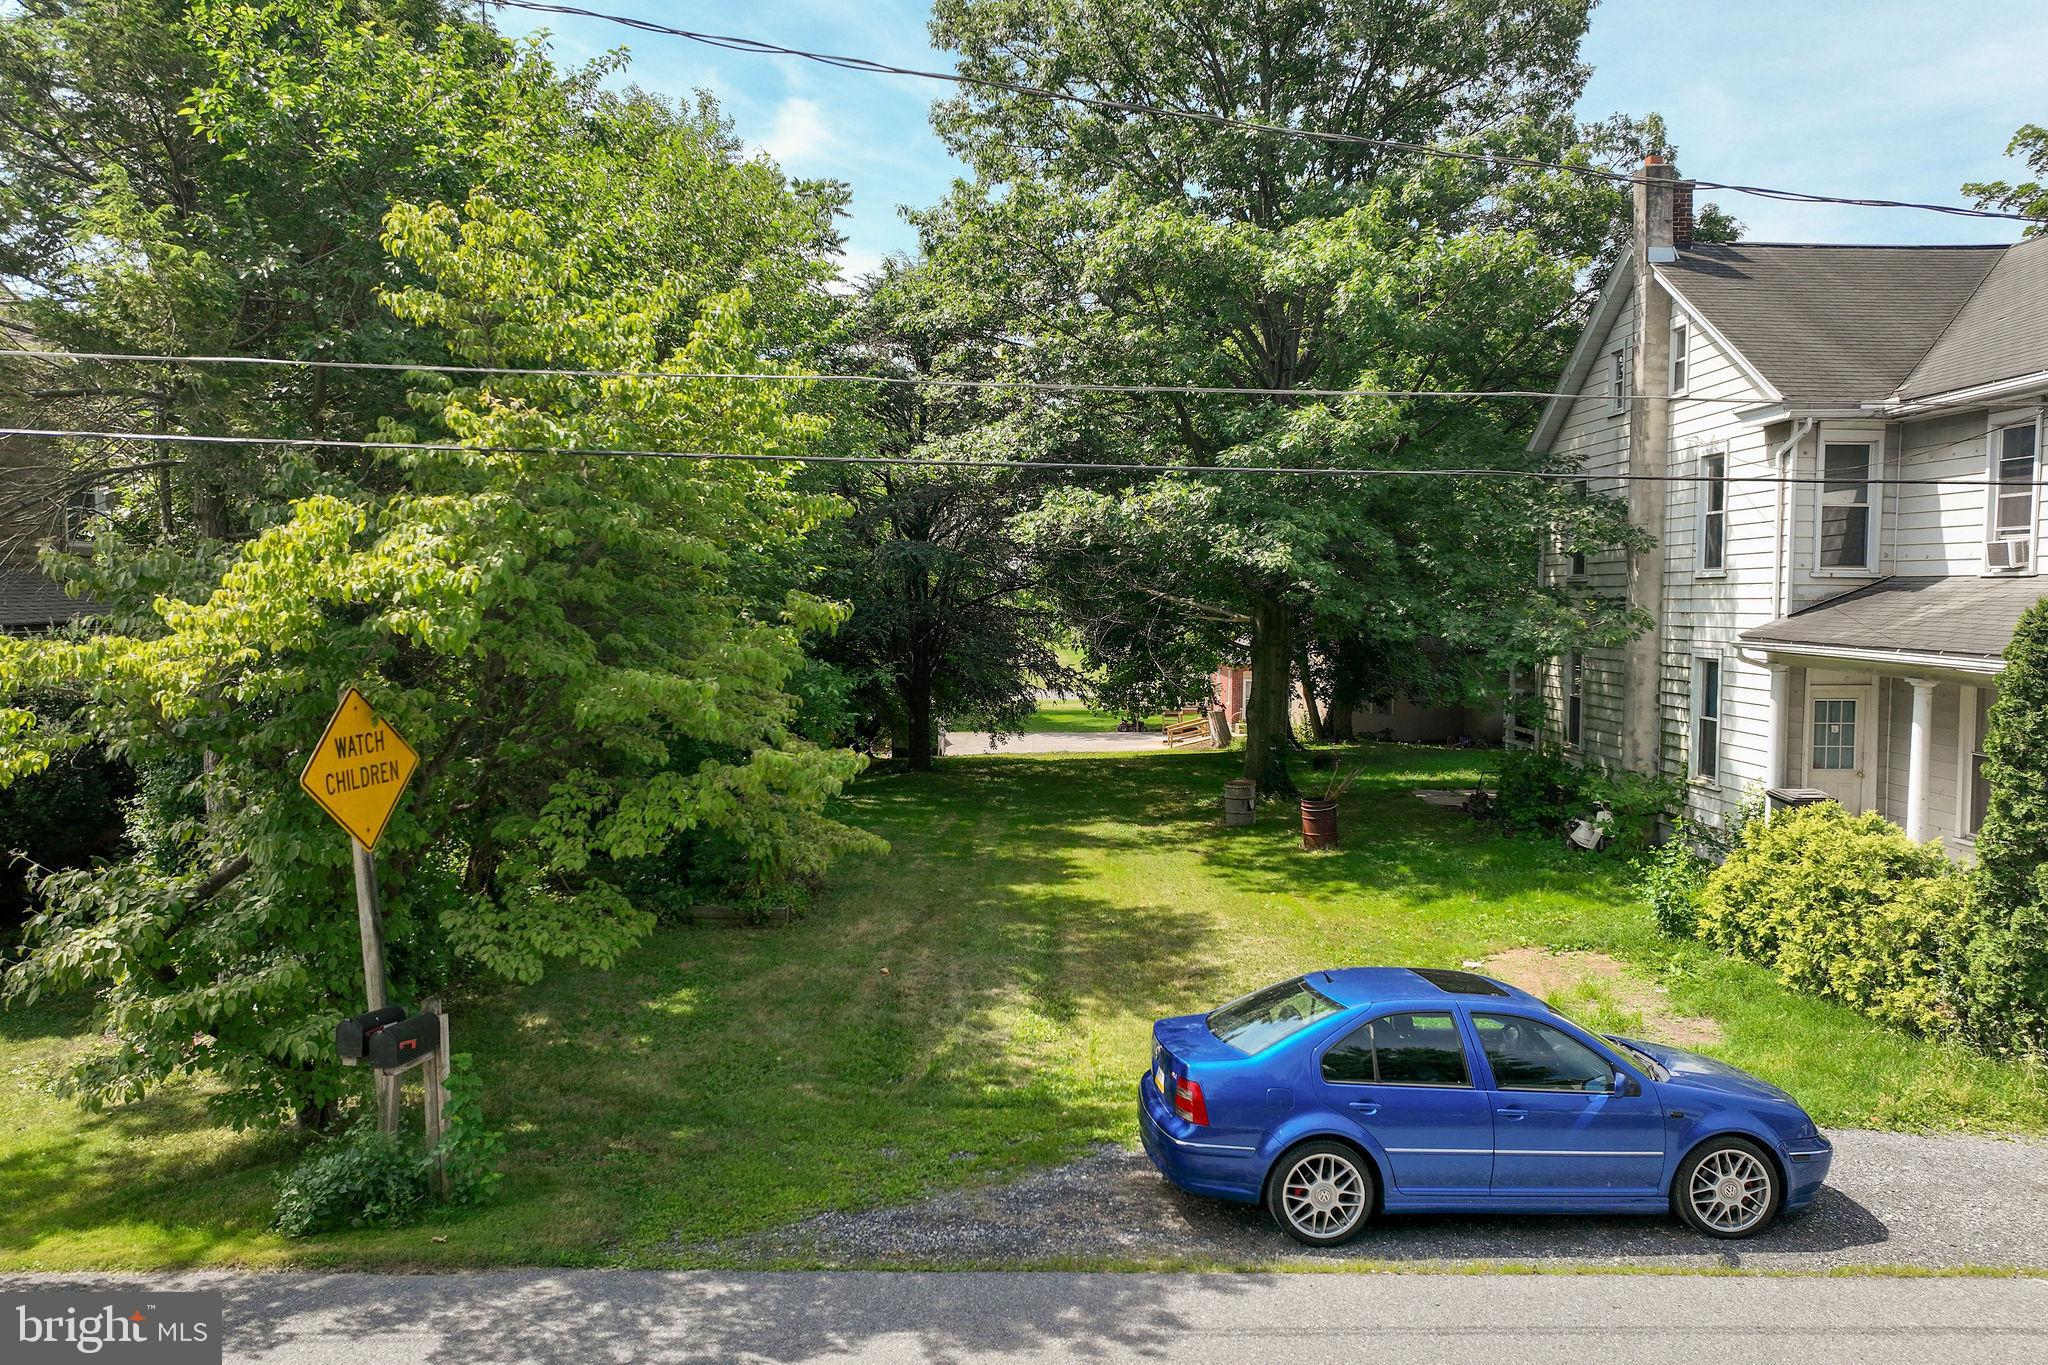 a car parked in front of a house and a yard